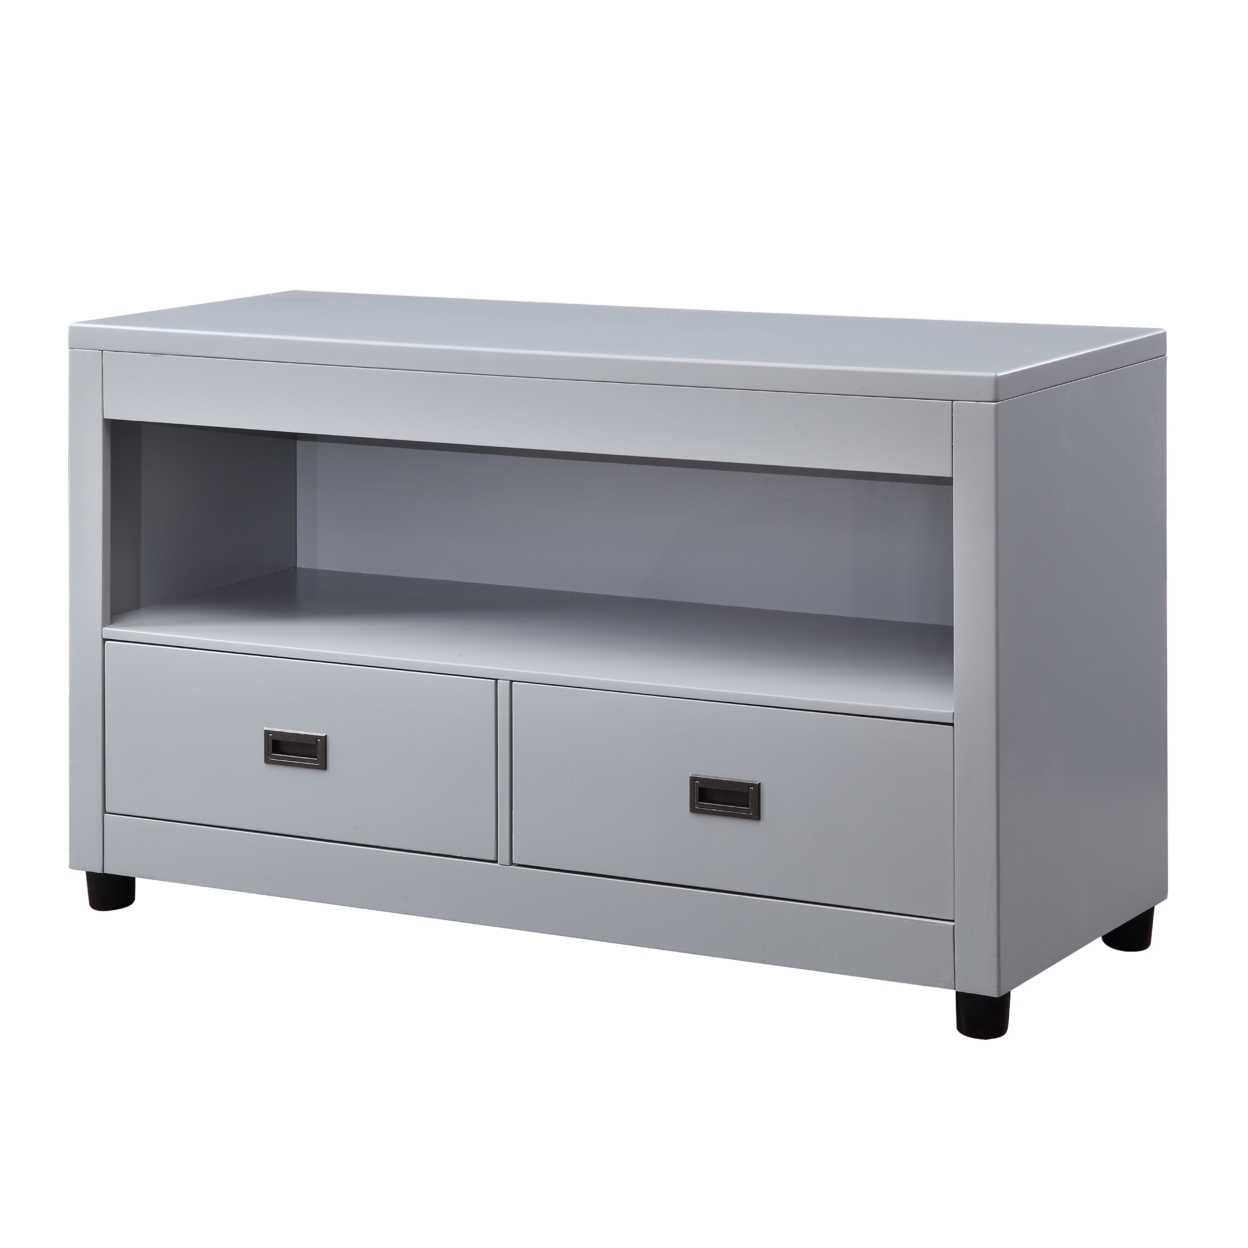 Wooden Console Cabinet With 2 Drawers And Open Shelf, Gray And Black- Saltoro Sherpi